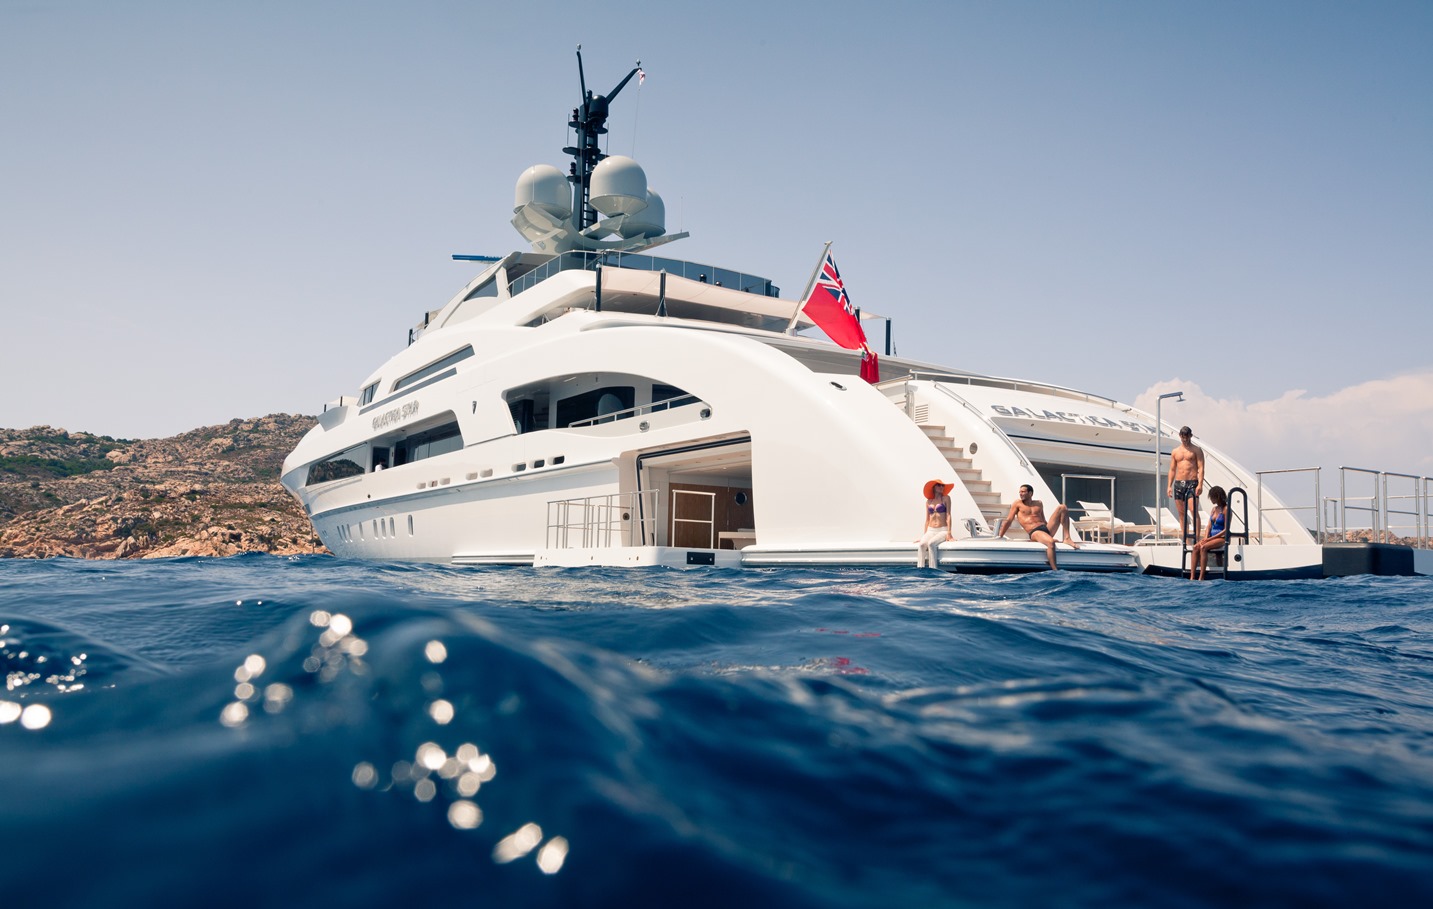 Luxury%20motor%20yacht%20charter%20Mediterranean%20-%20Yacht%20by%20Heesen%20and%20Photography%20by%20Jeff%20Brown.jpg